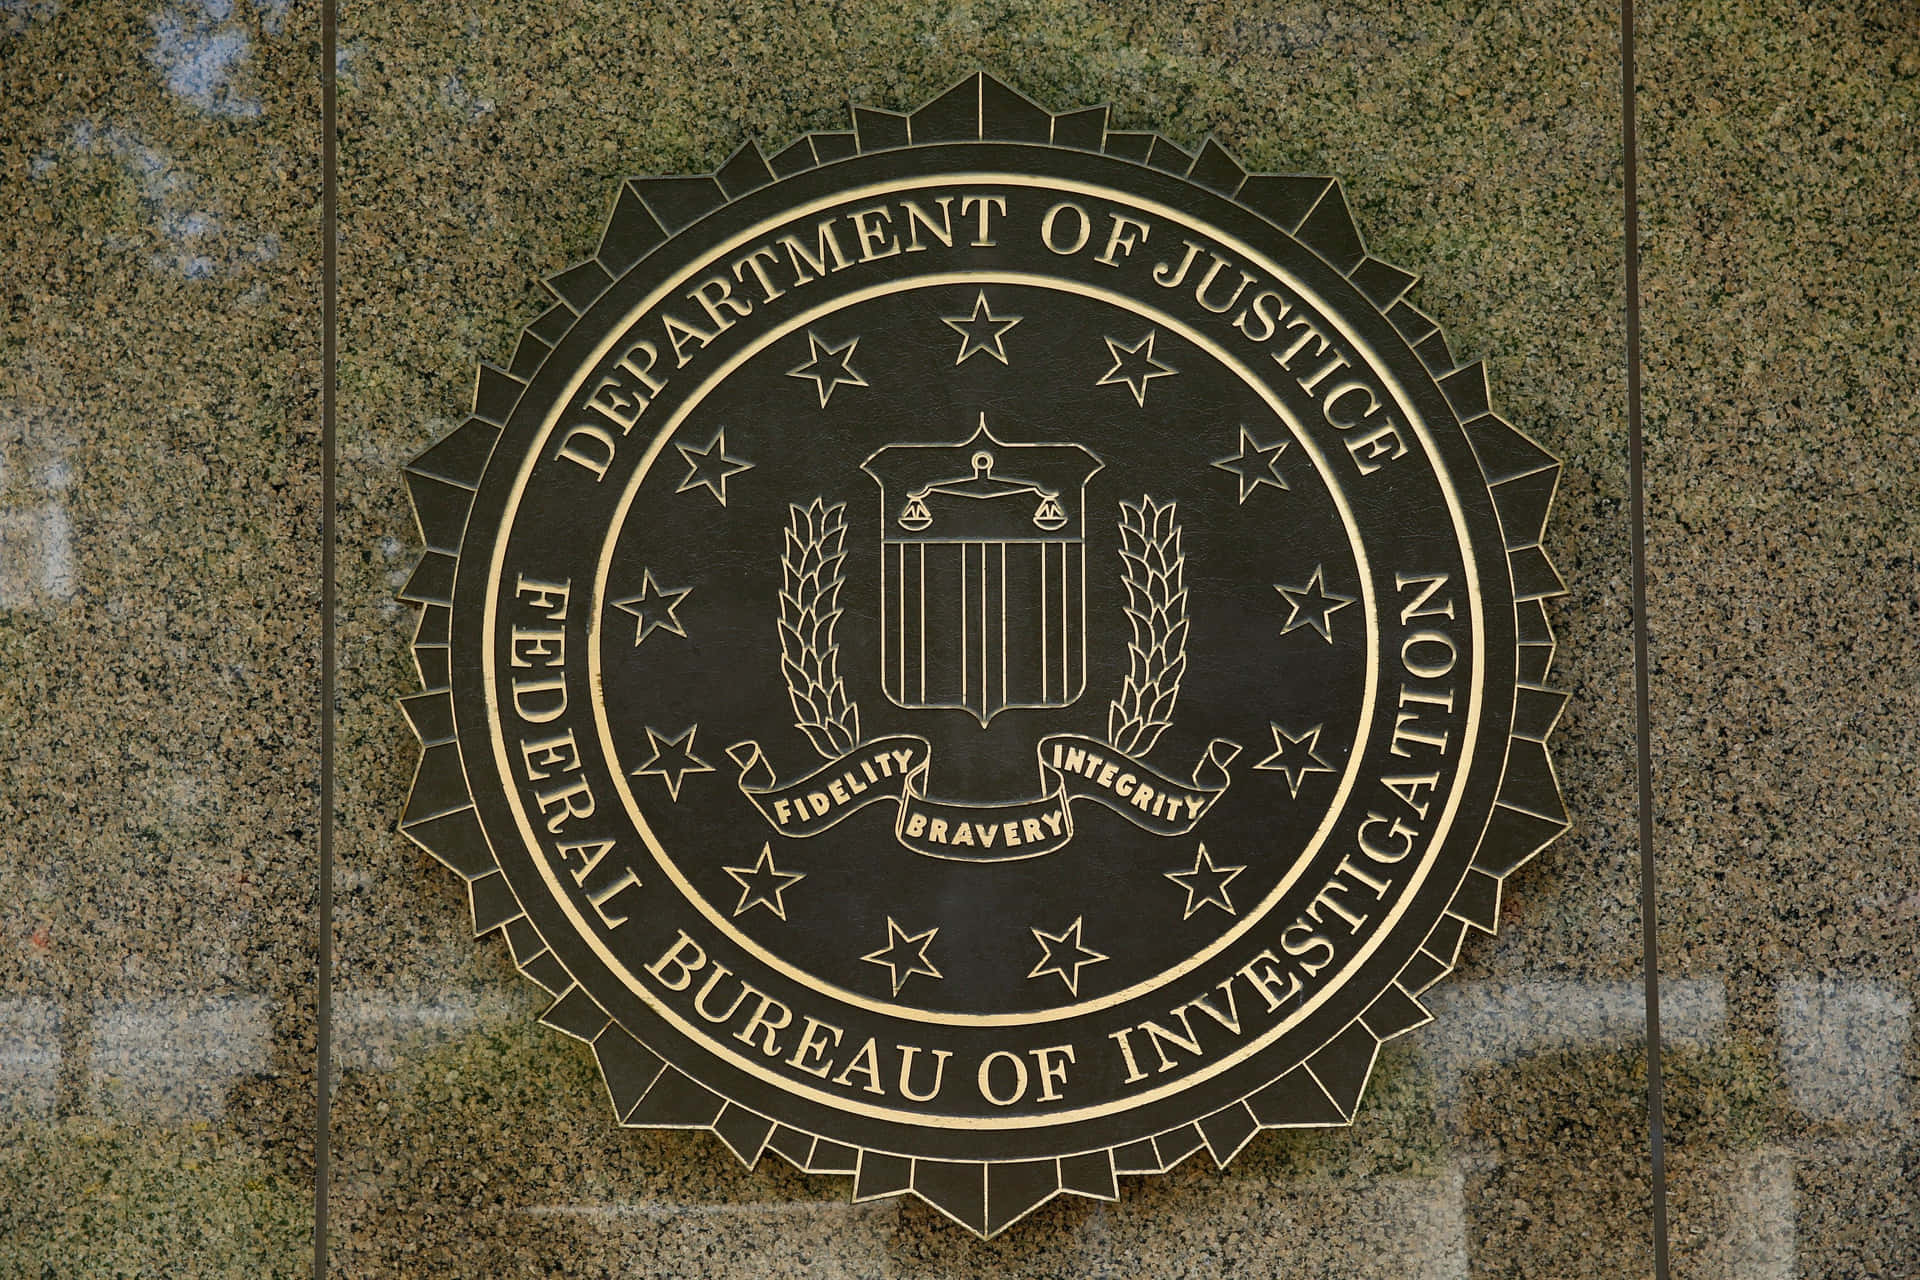 The Fbi Logo Is On The Wall Of A Building Wallpaper